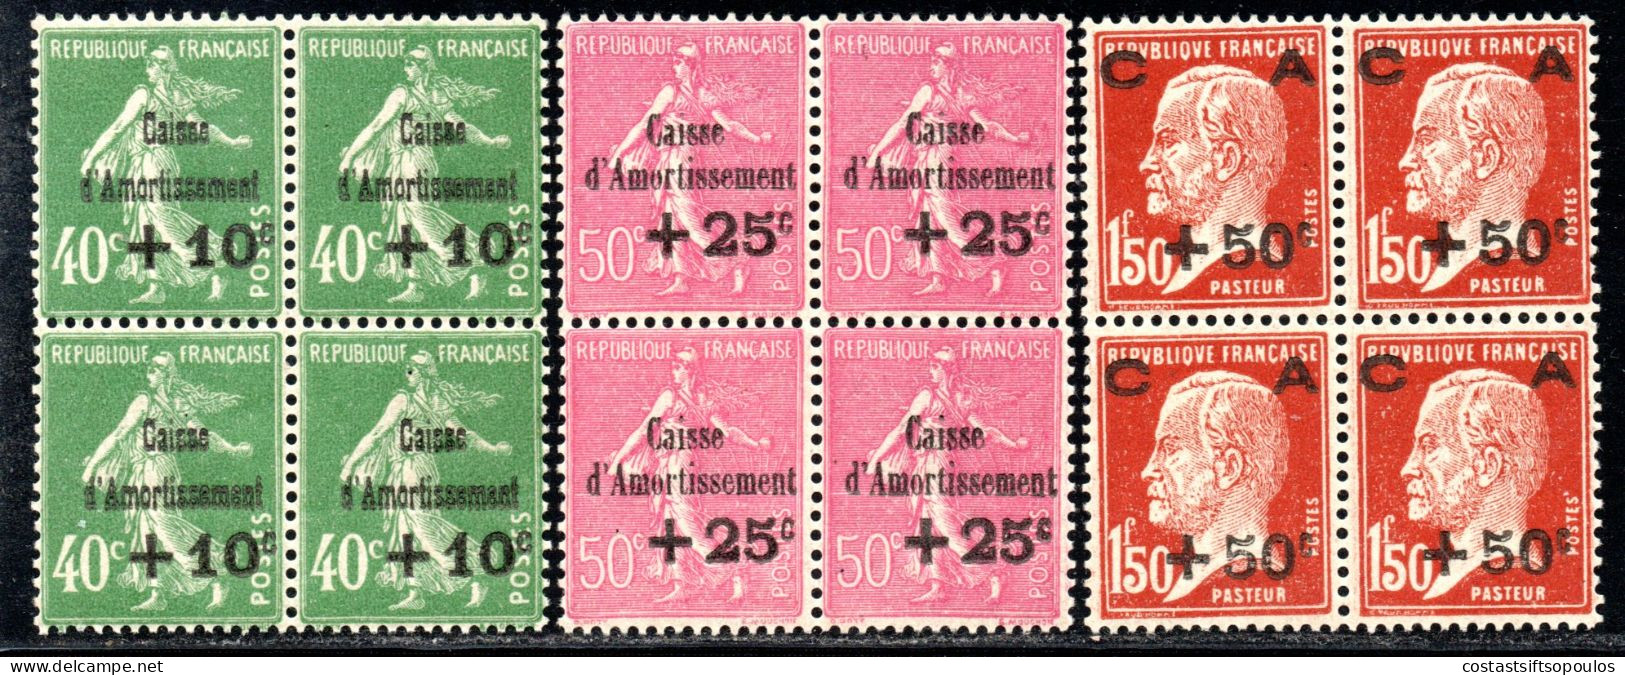 2614.FRANCE 1929 SINKING FUNDS #253-255 MNH BLOCKS OF 4,2-3 INVISIBLE TRACES OF HINGE.SEE VERY LIGHT GUM BLEMISHES - 1927-31 Caisse D'Amortissement